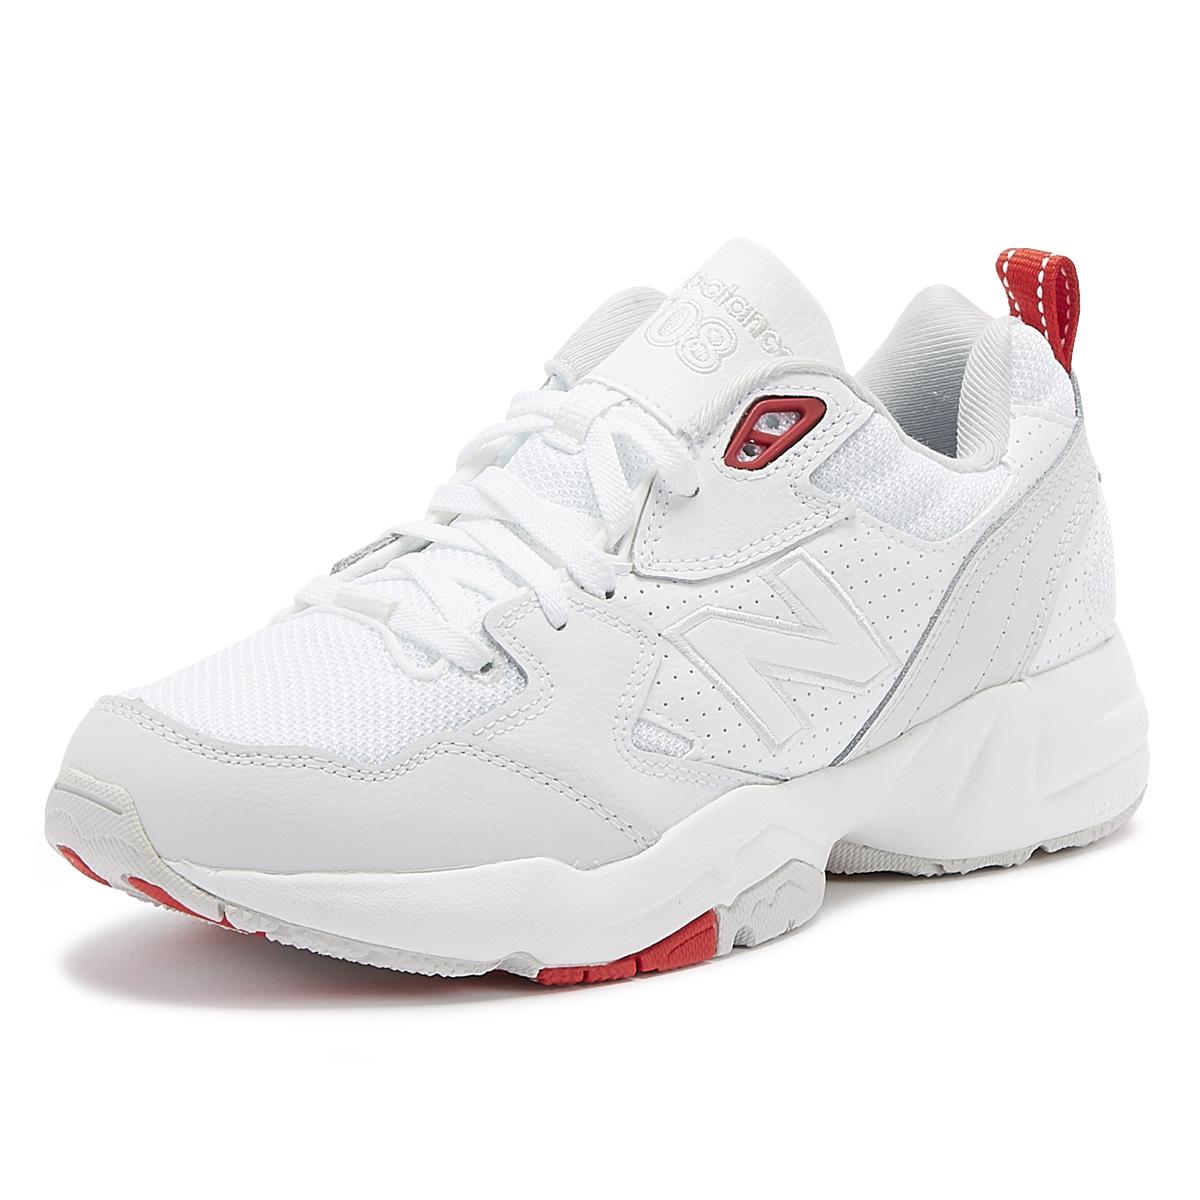 New Balance Leather 708 S White/grey/red Trainers - Lyst